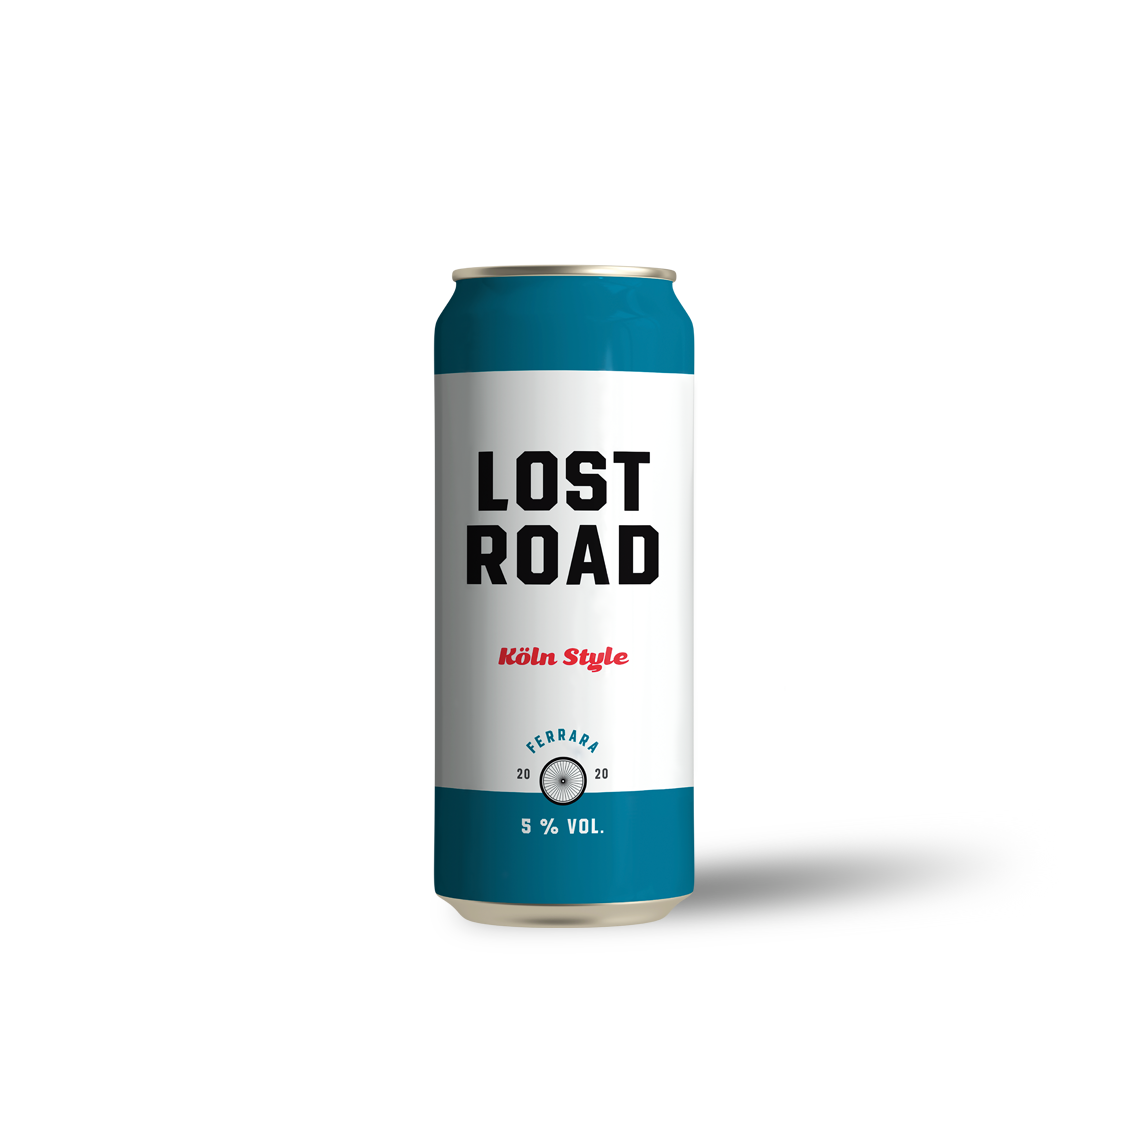 https://www.lostroad.it/wp-content/uploads/2022/02/koln-style-lost-road-beer.png